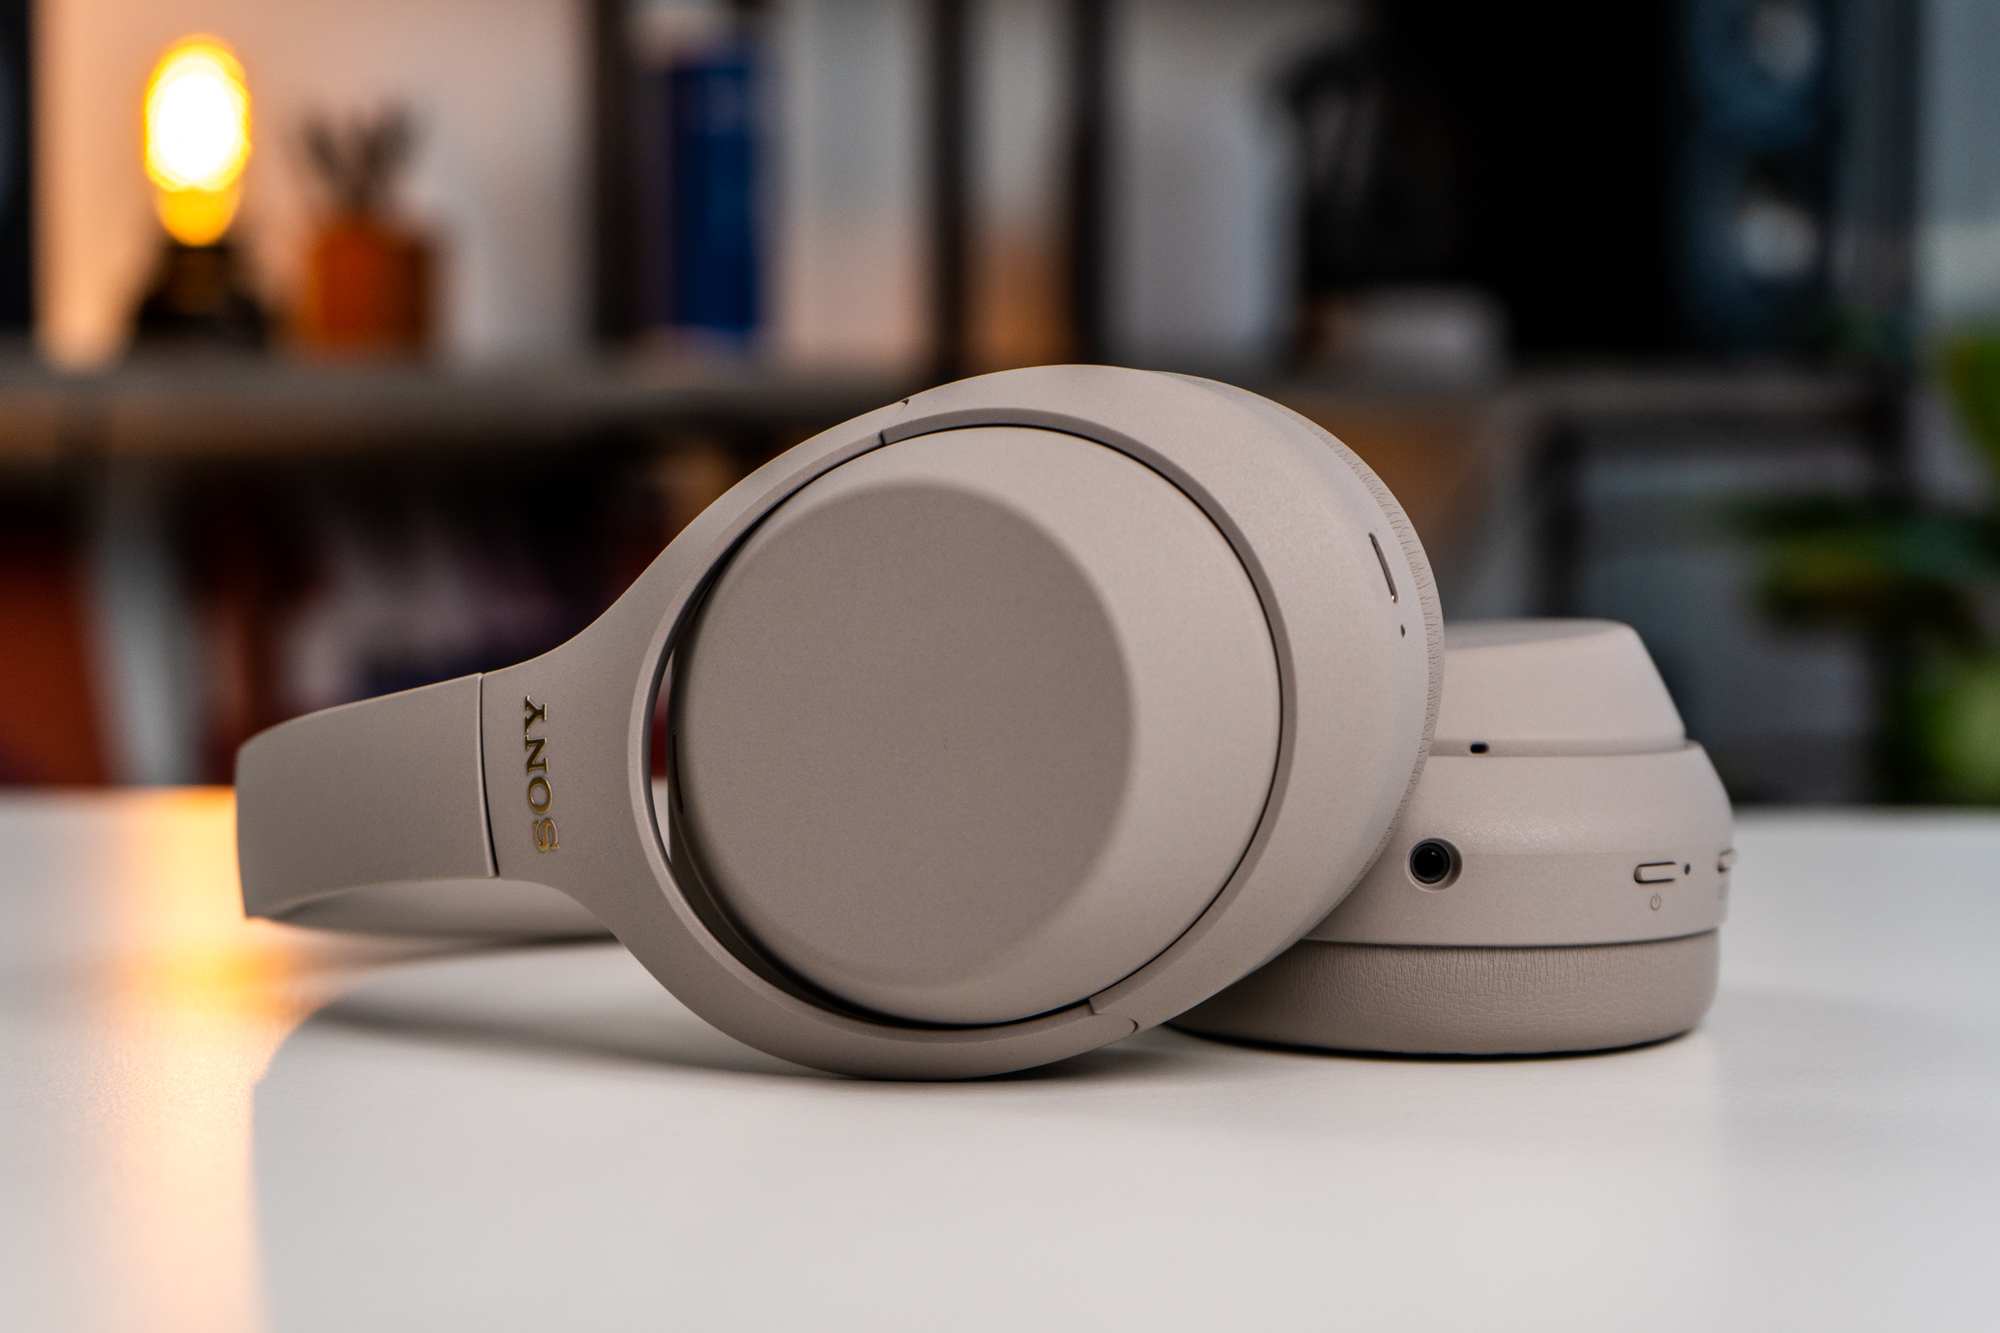 Sony's WH-1000XM3 headphones are £110 OFF – £120 cheaper than the XM4